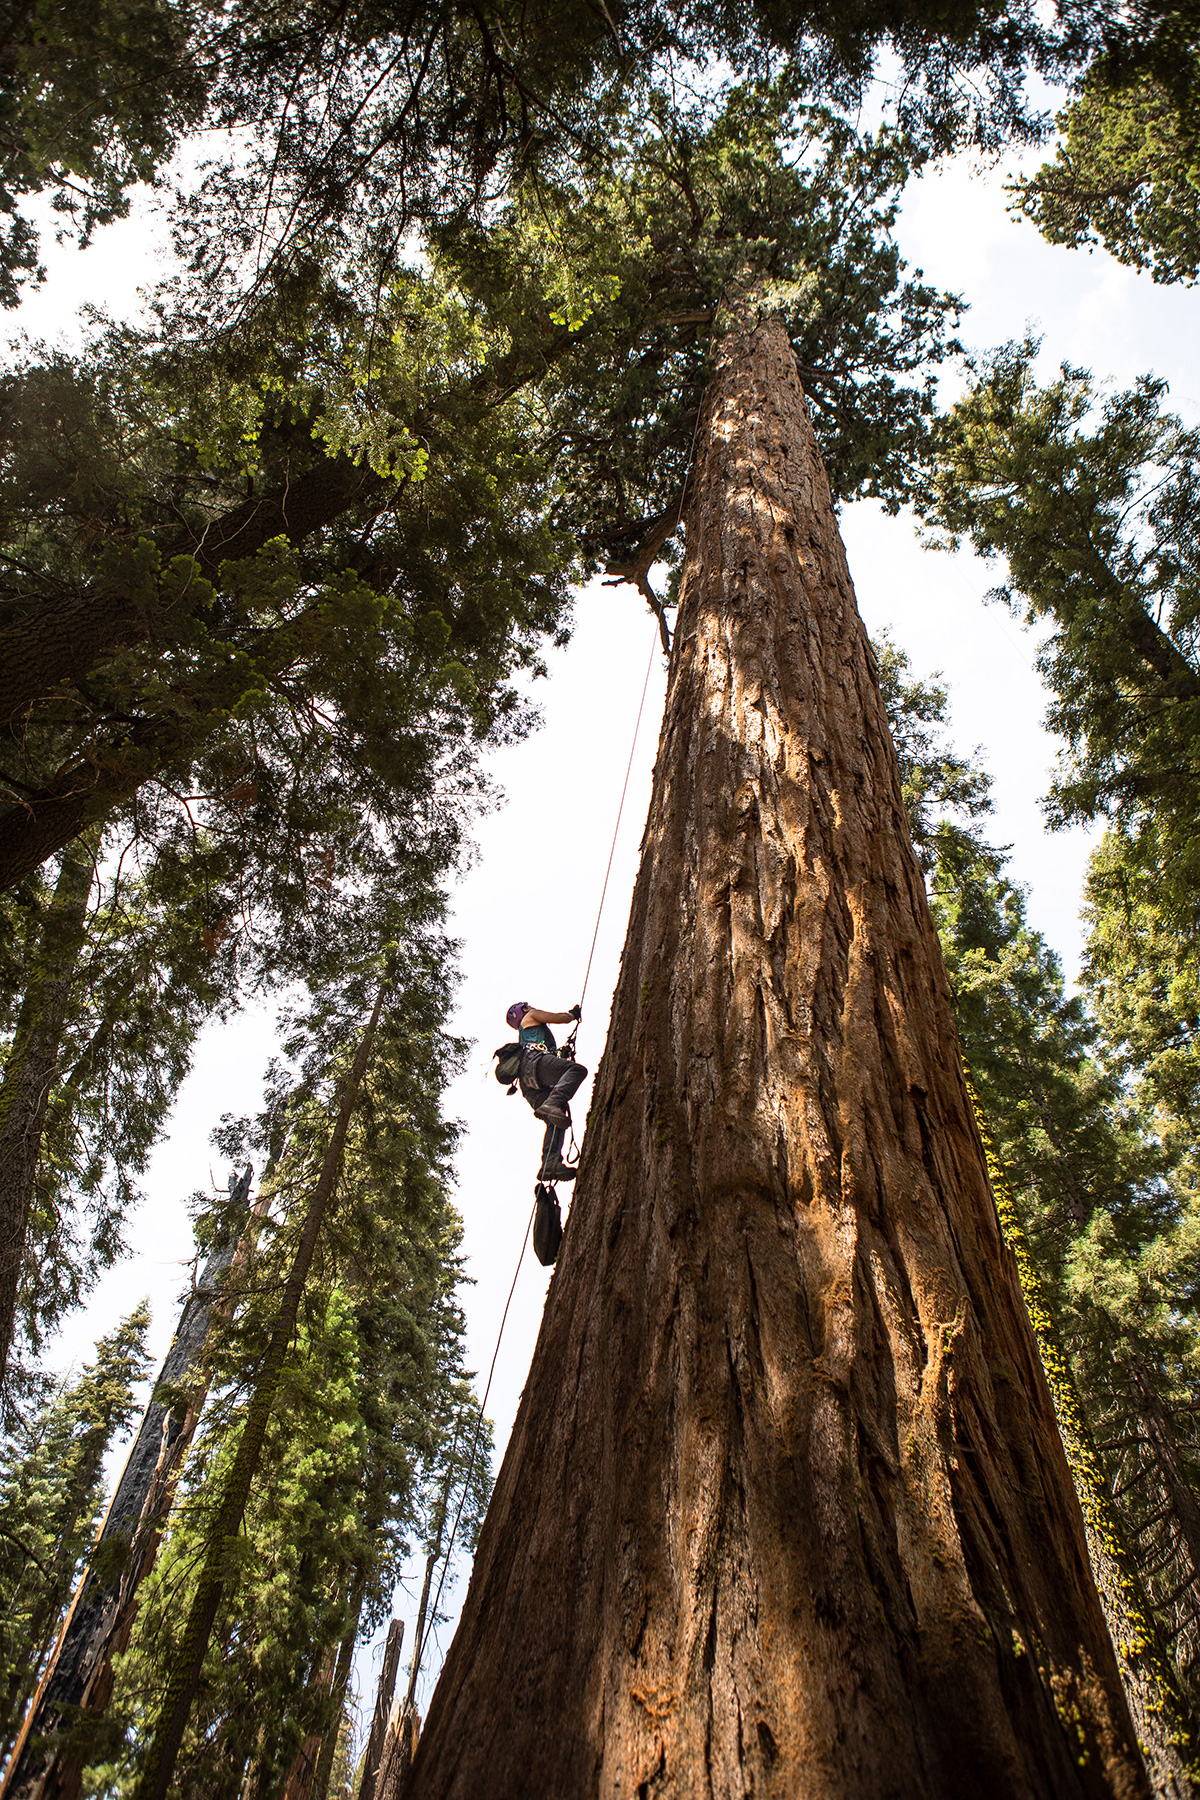 Forest canopy ecologist Wendy Baxter collects samples of xylem (the tissue that transports water) from a giant sequoia in August 2021, in the hope of finding out why some trees seem more resilient to beetles and fire during drought. Baxter and colleague Anthony Ambrose are also helping the National Park Service build an archive of sequoia cones to preserve genetic diversity in case more trees are lost.